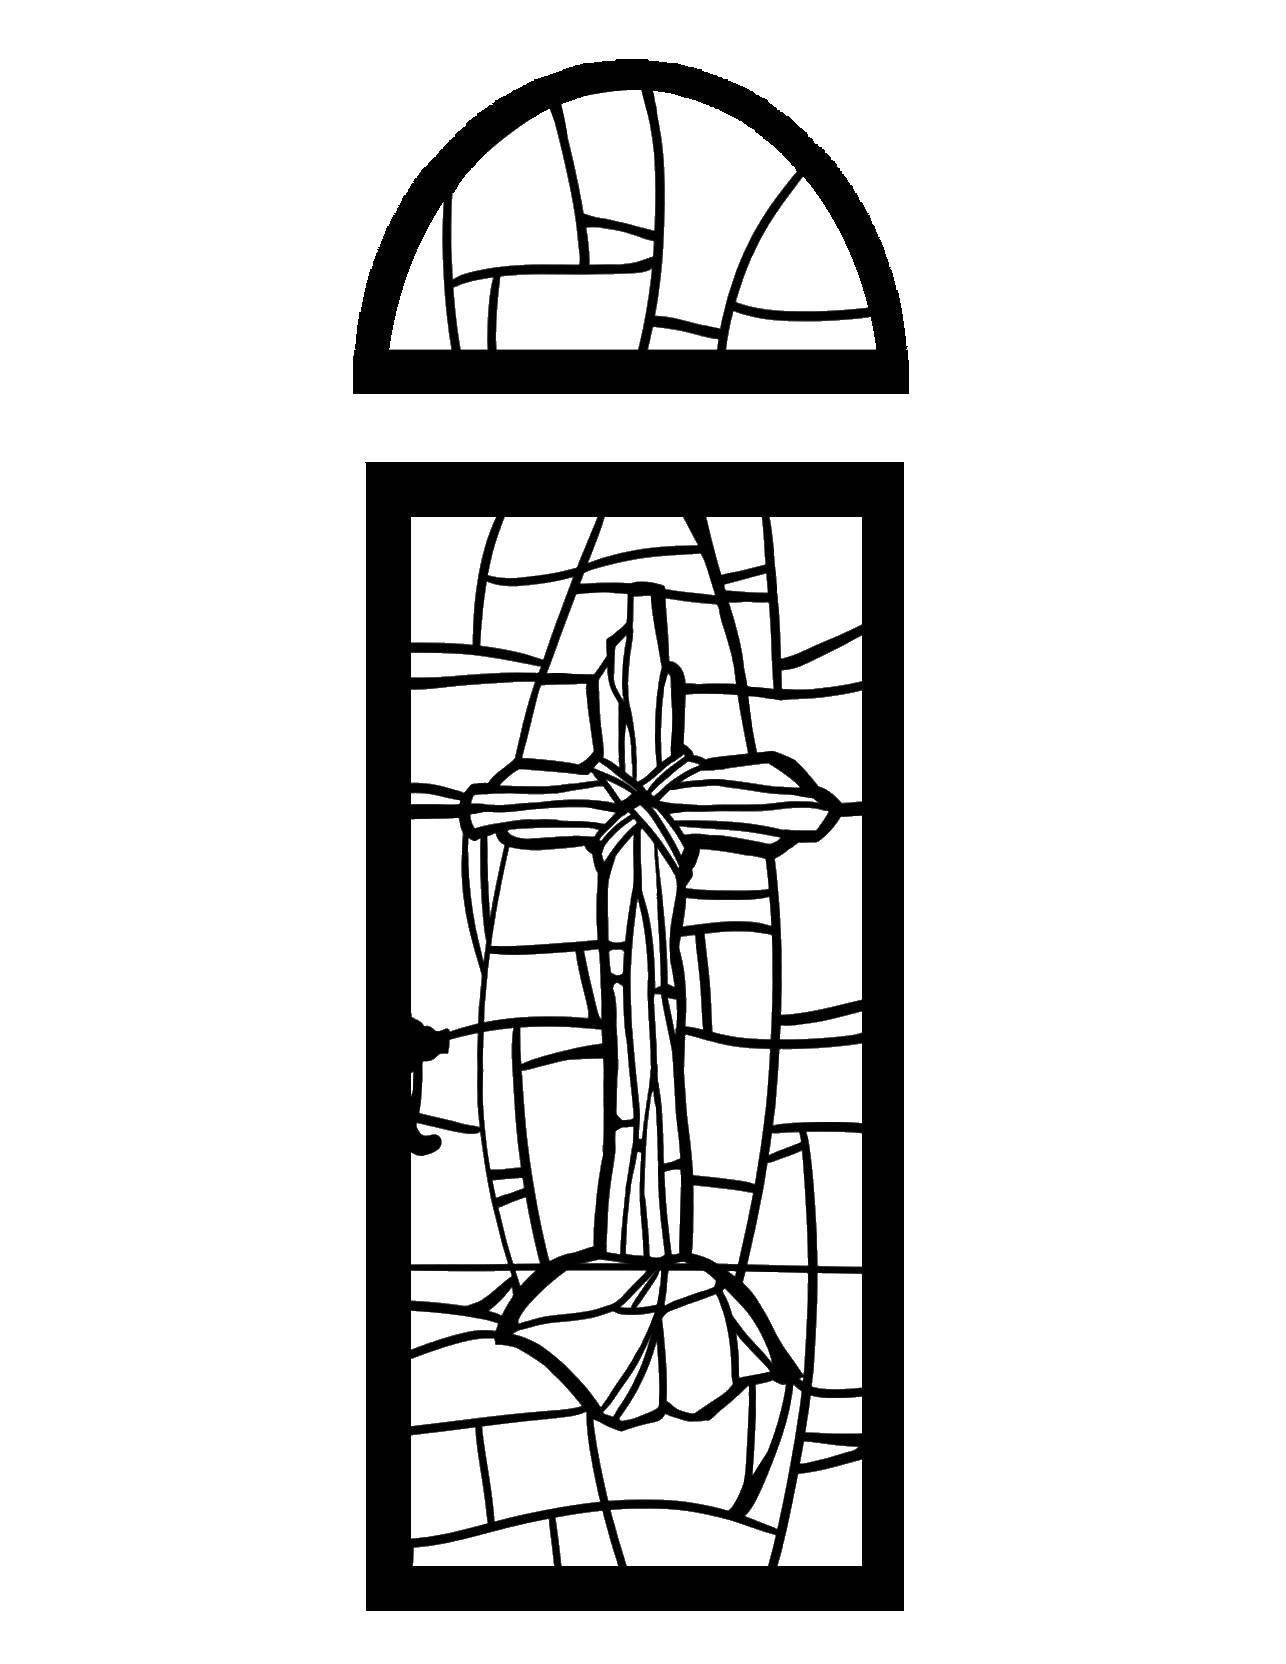 Coloring The cross in the stained glass. Category Cross. Tags:  the cross, stained glass.